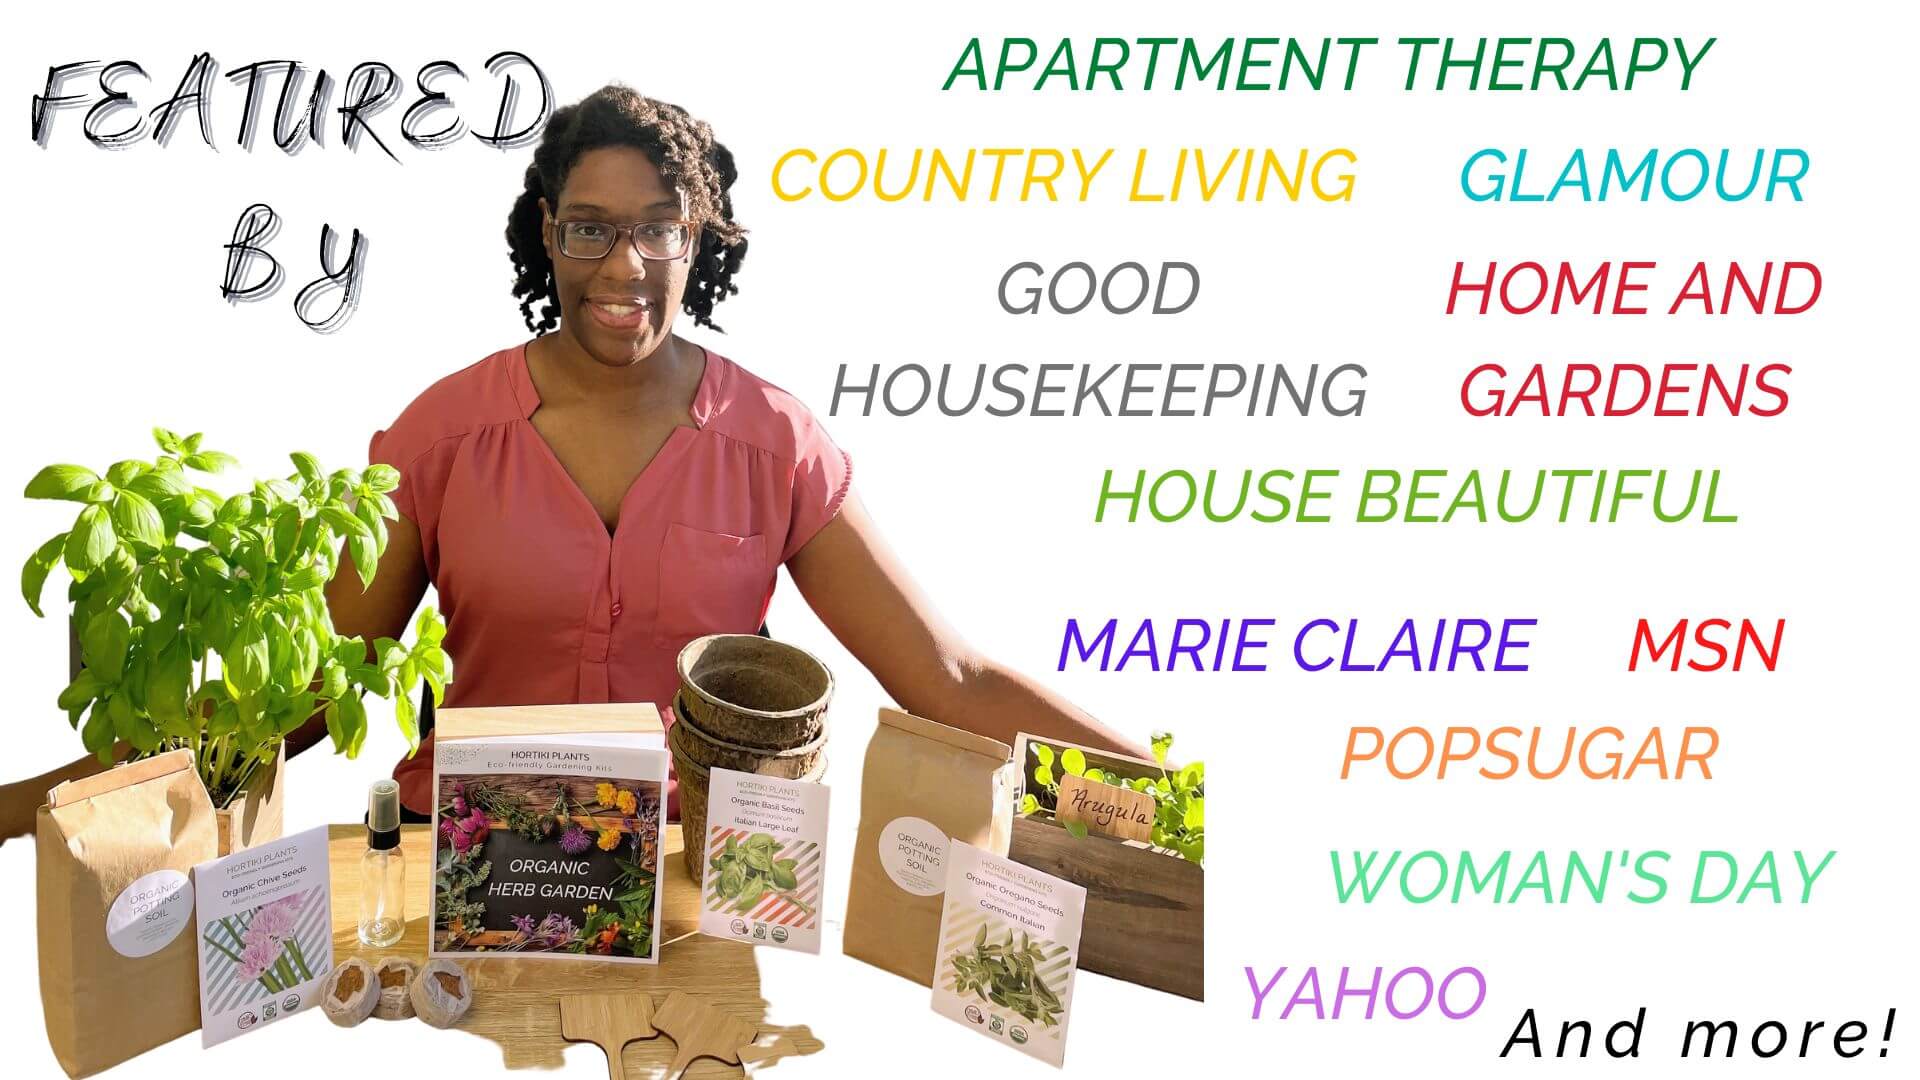 Victoria LeBeaux with garden kits and list of popular magazines featuring Hortiki Plants. Good Housekeeping. Womans Day. Glamour. Pop Sugar. Apartment Therapy. House Beautiful. Yahoo. MSN. Women's Health. Marie Claire. Home and Gardens. Country Living.